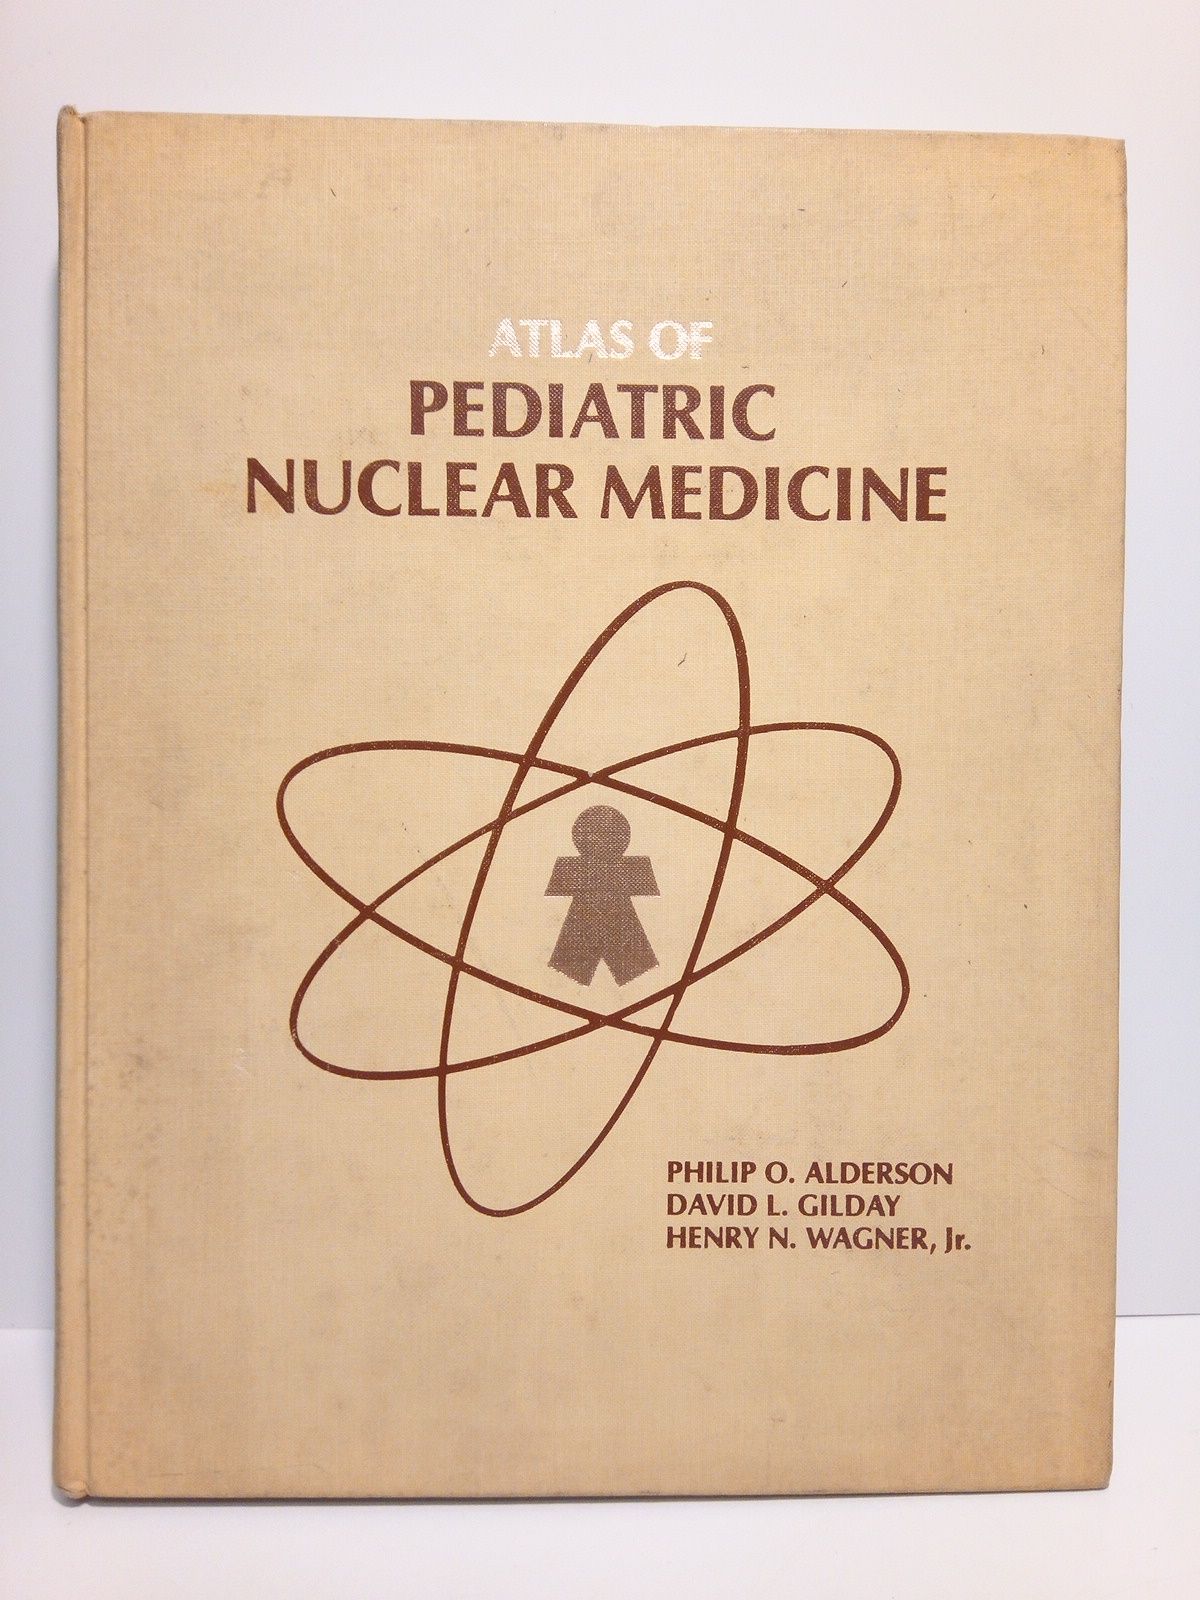 ALDERSON, Philip O.; David L. Gilday; Henry N. Wagner, Jr. - Atles of Pediatric nuclear medicine /  With the assistance of Julia W. Buchanan and Wendy A. North; Foreword by B. J. Reilly